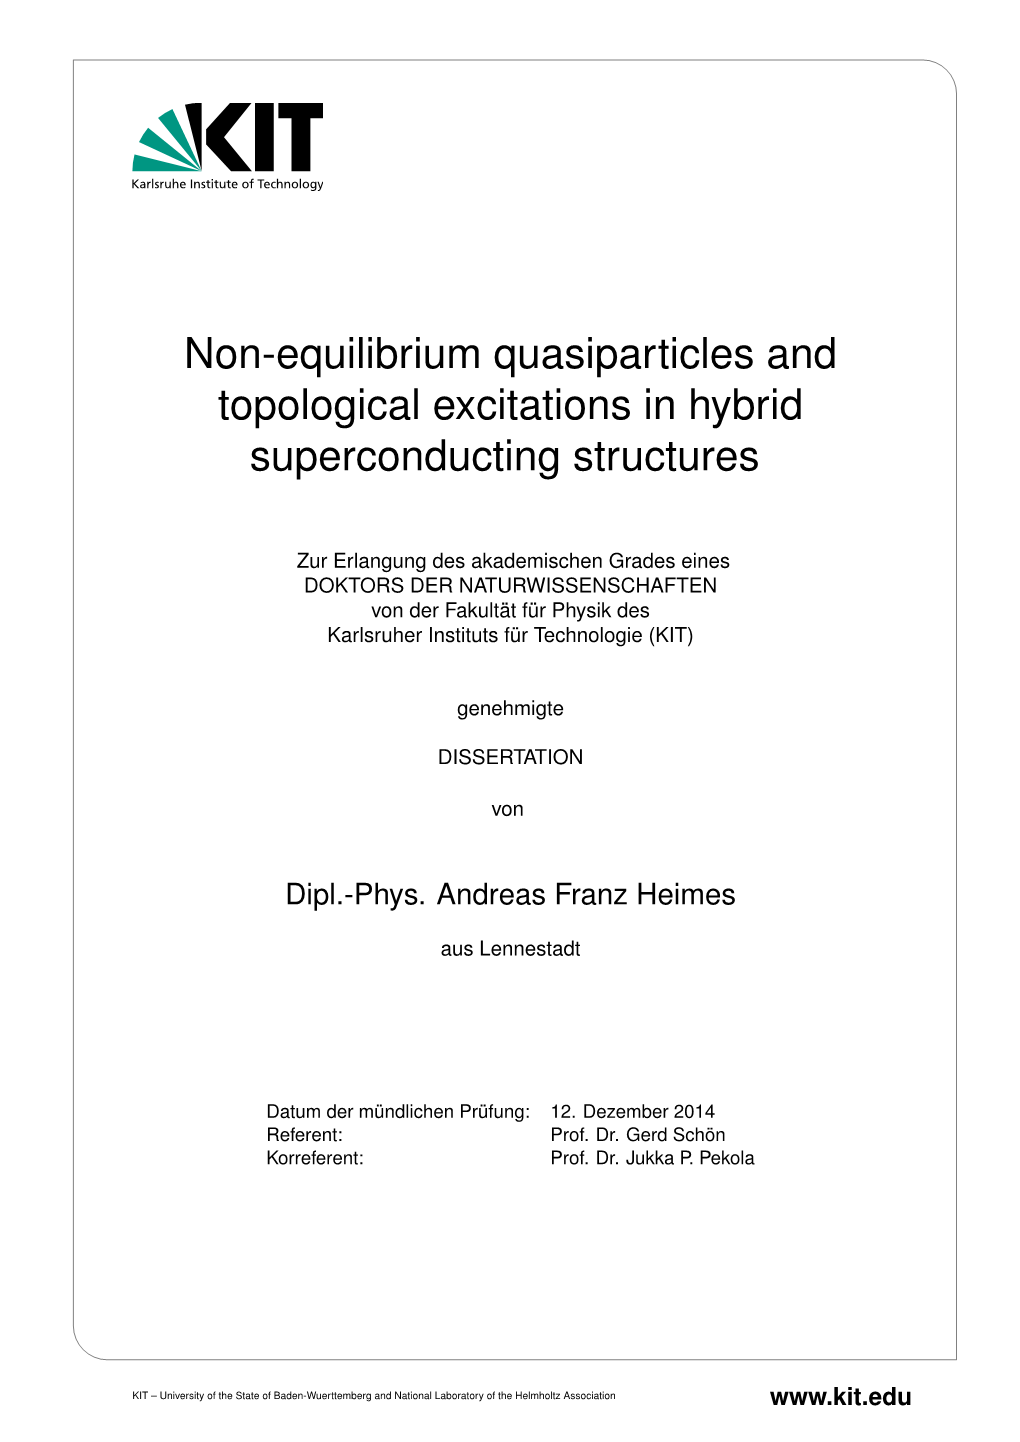 Non-Equilibrium Quasiparticles and Topological Excitations in Hybrid Superconducting Structures